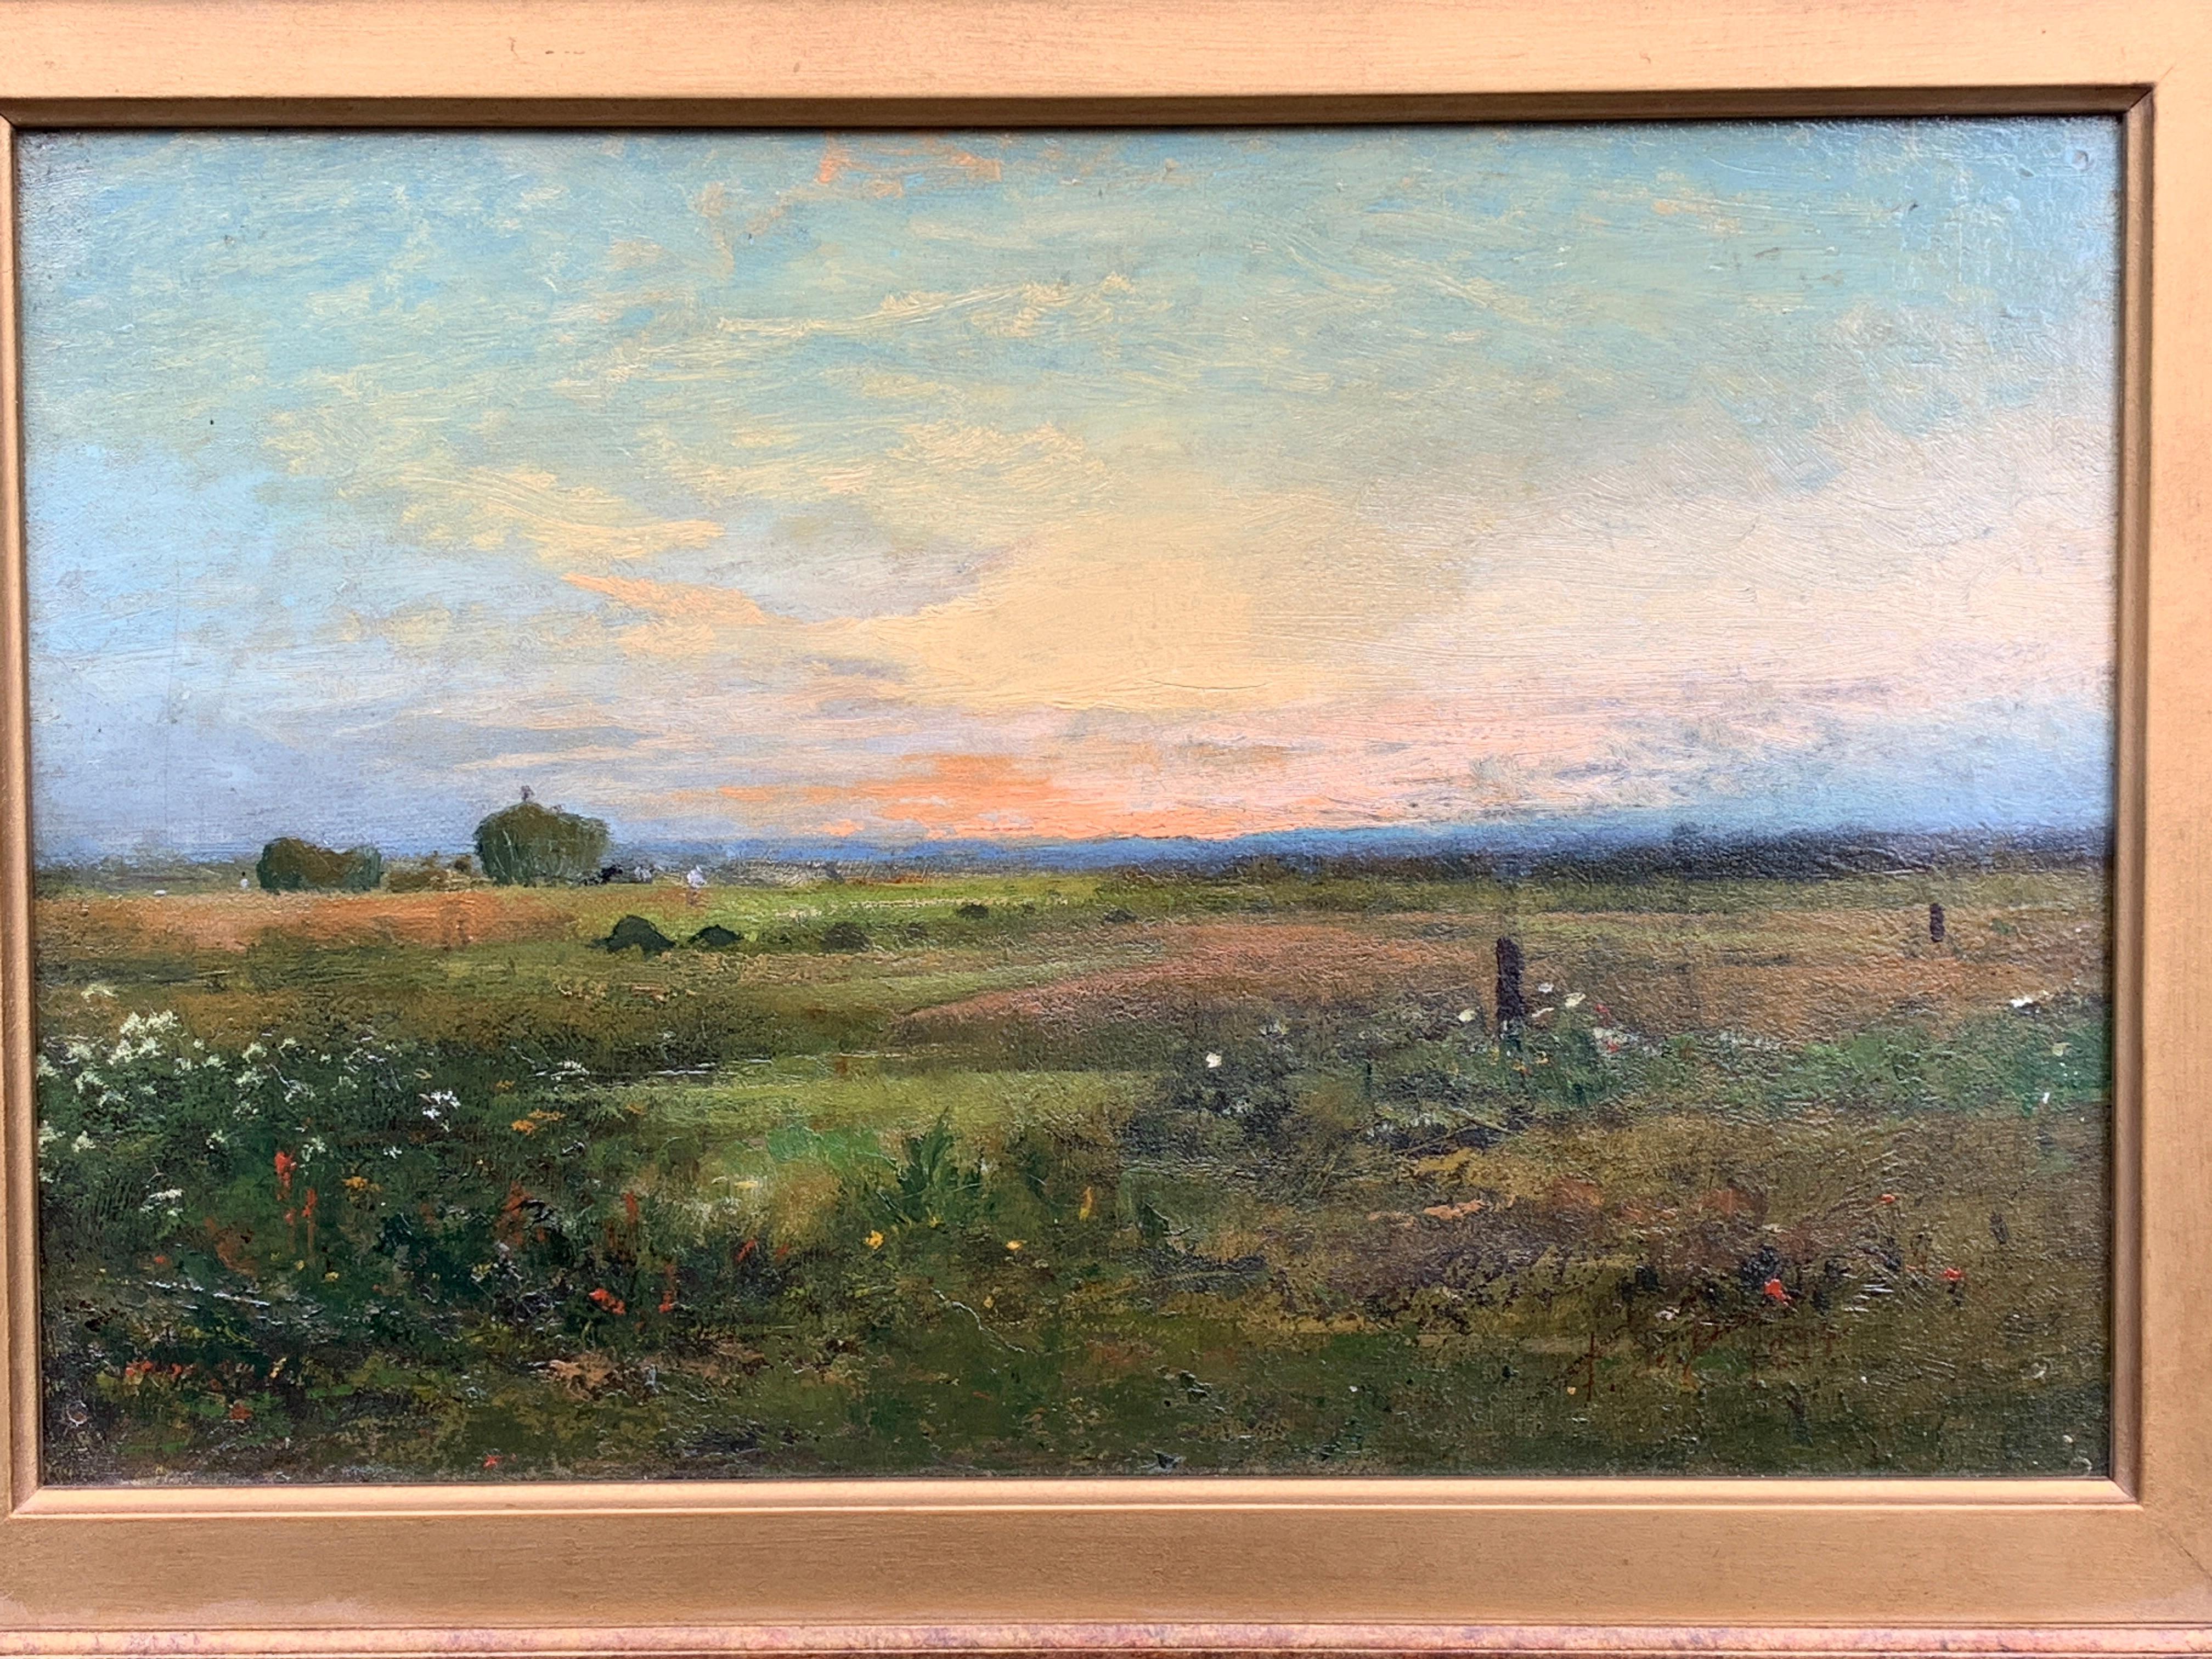 French 19th century Impressionist sunset landscape, with wild flowers in a field - Painting by F de Brenah